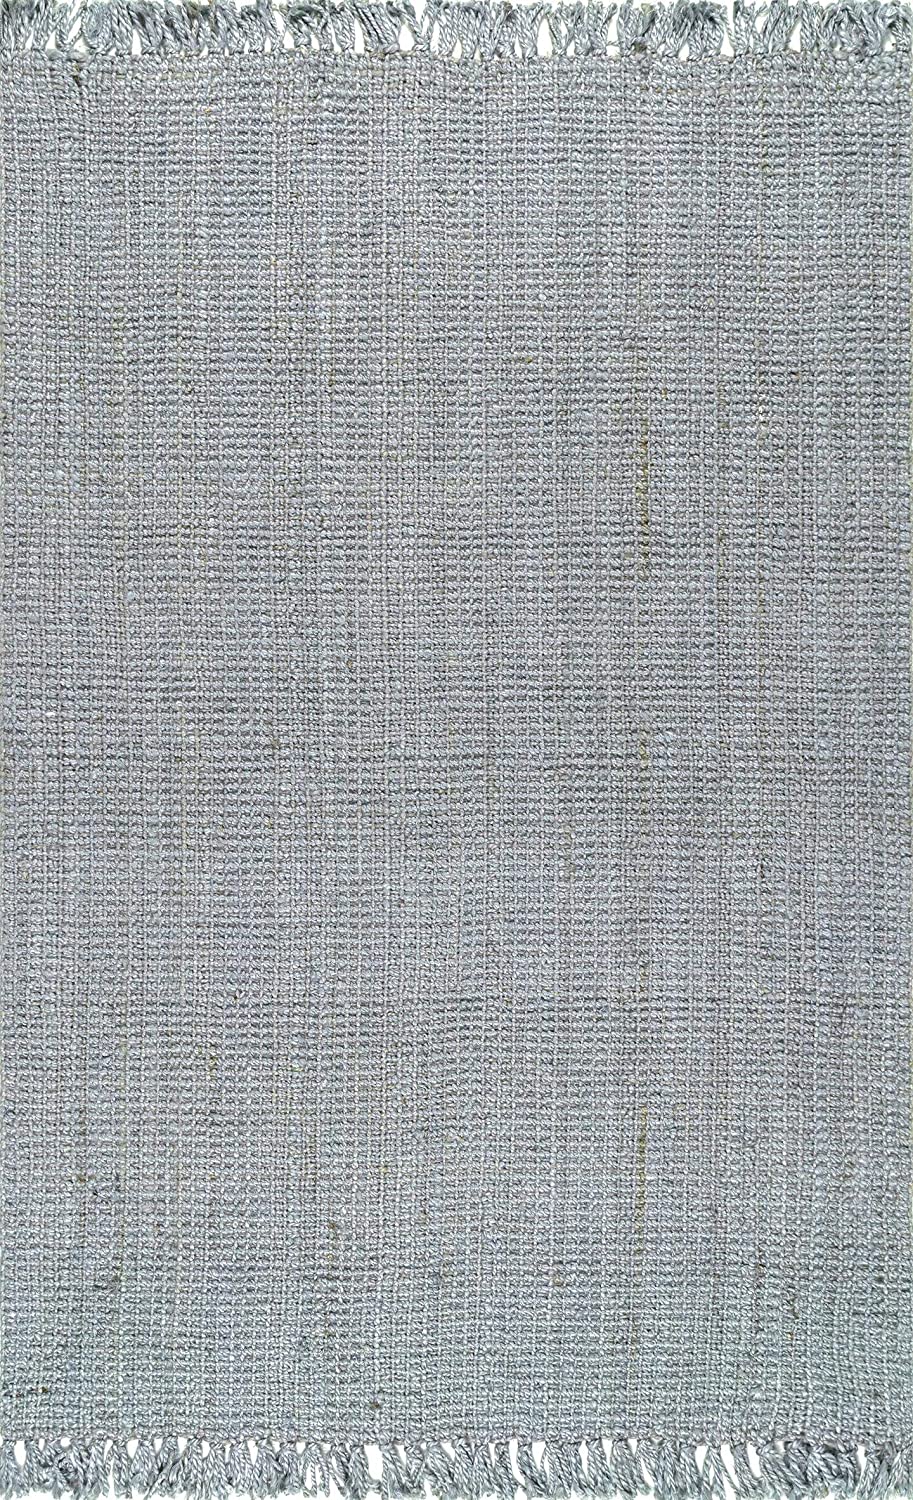 Chunky Loop Grey  Jute Rug - Multiple sizes available